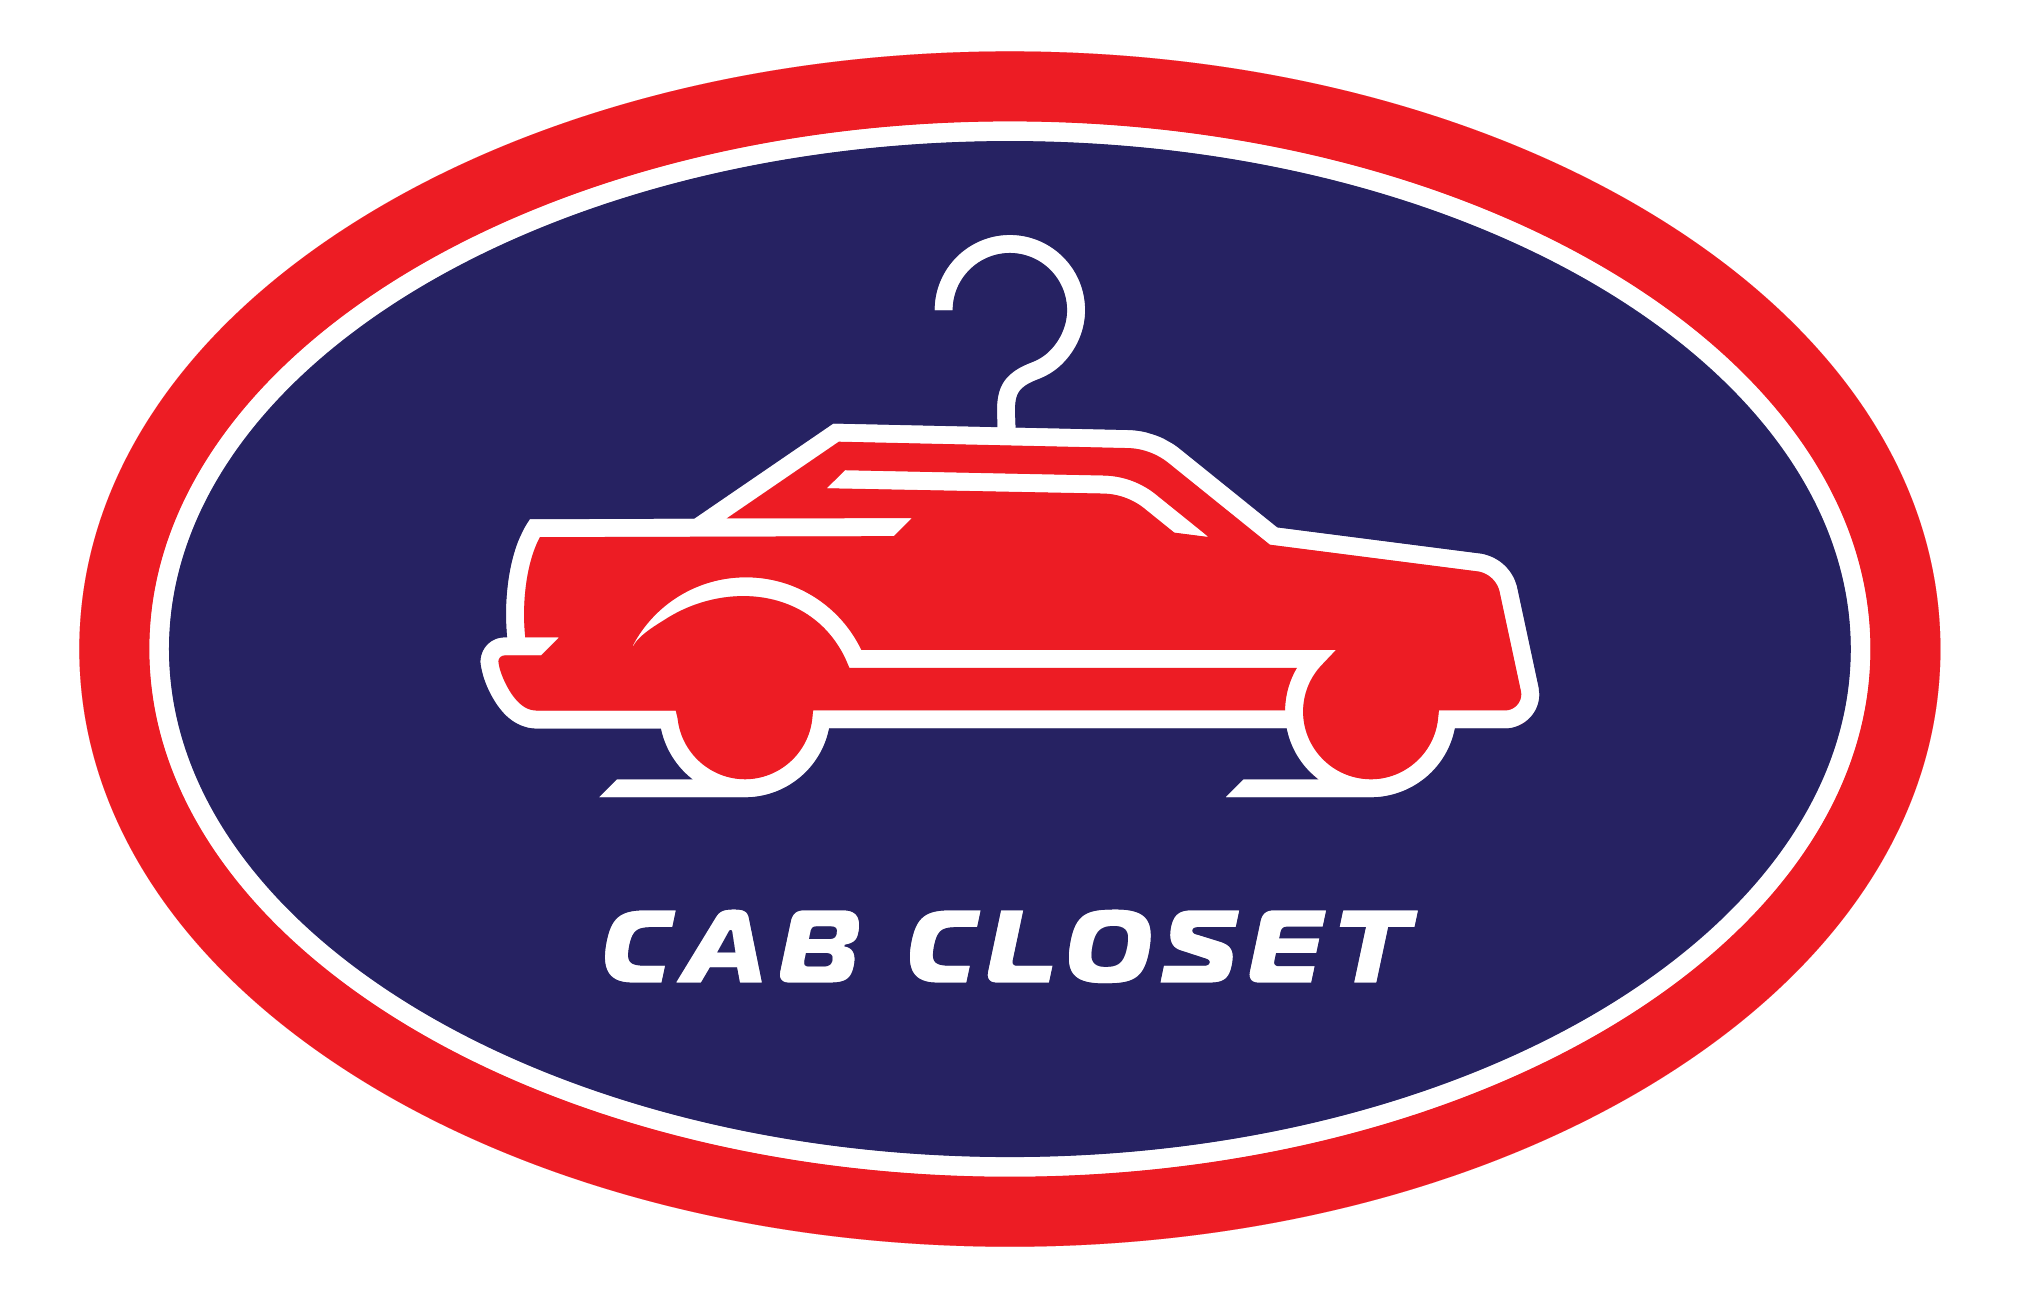 CabCloset - Simplifies transport of clothing, from your closet to your vehicle